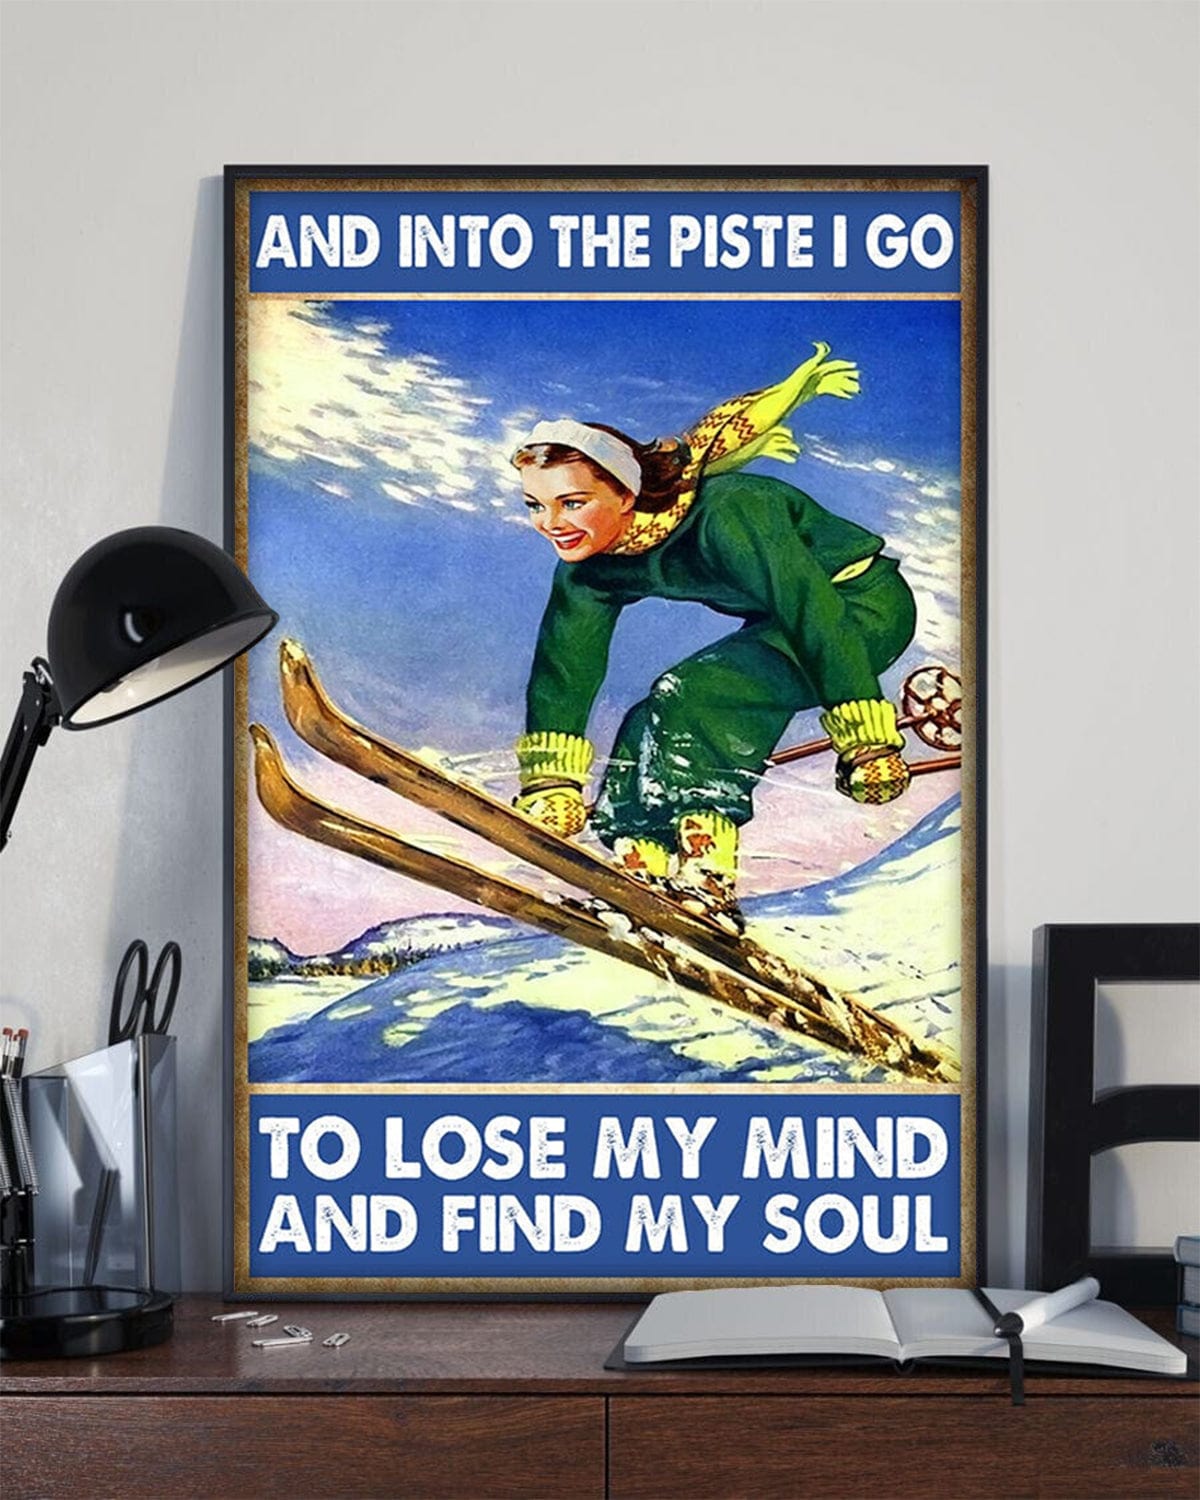 Skiing And Into The Piste I Go To lose My Mind And Find My Soul Skier Poster, Canvas